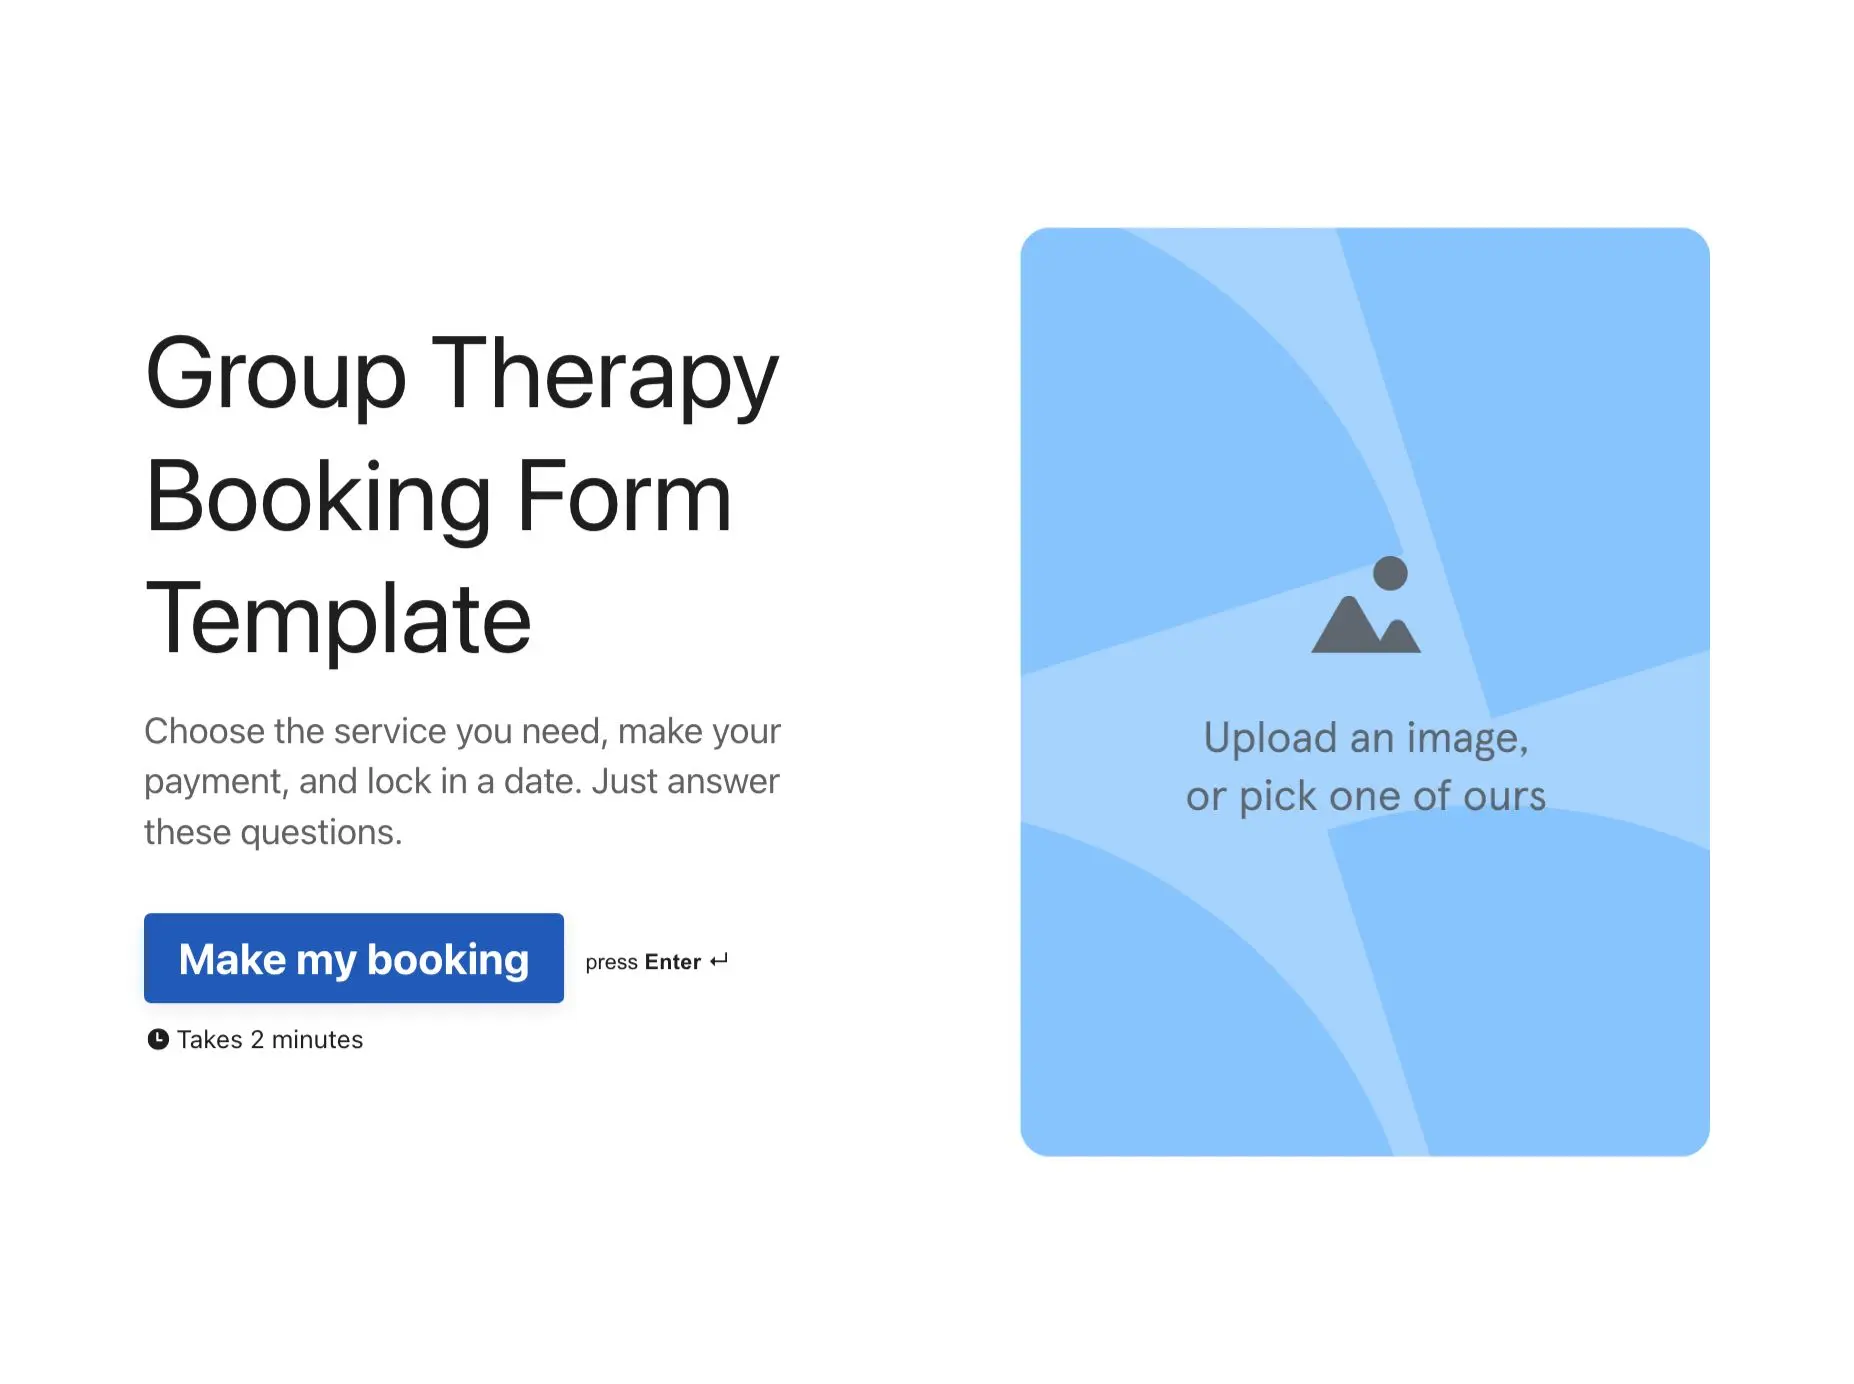 Group Therapy Booking Form Template Hero